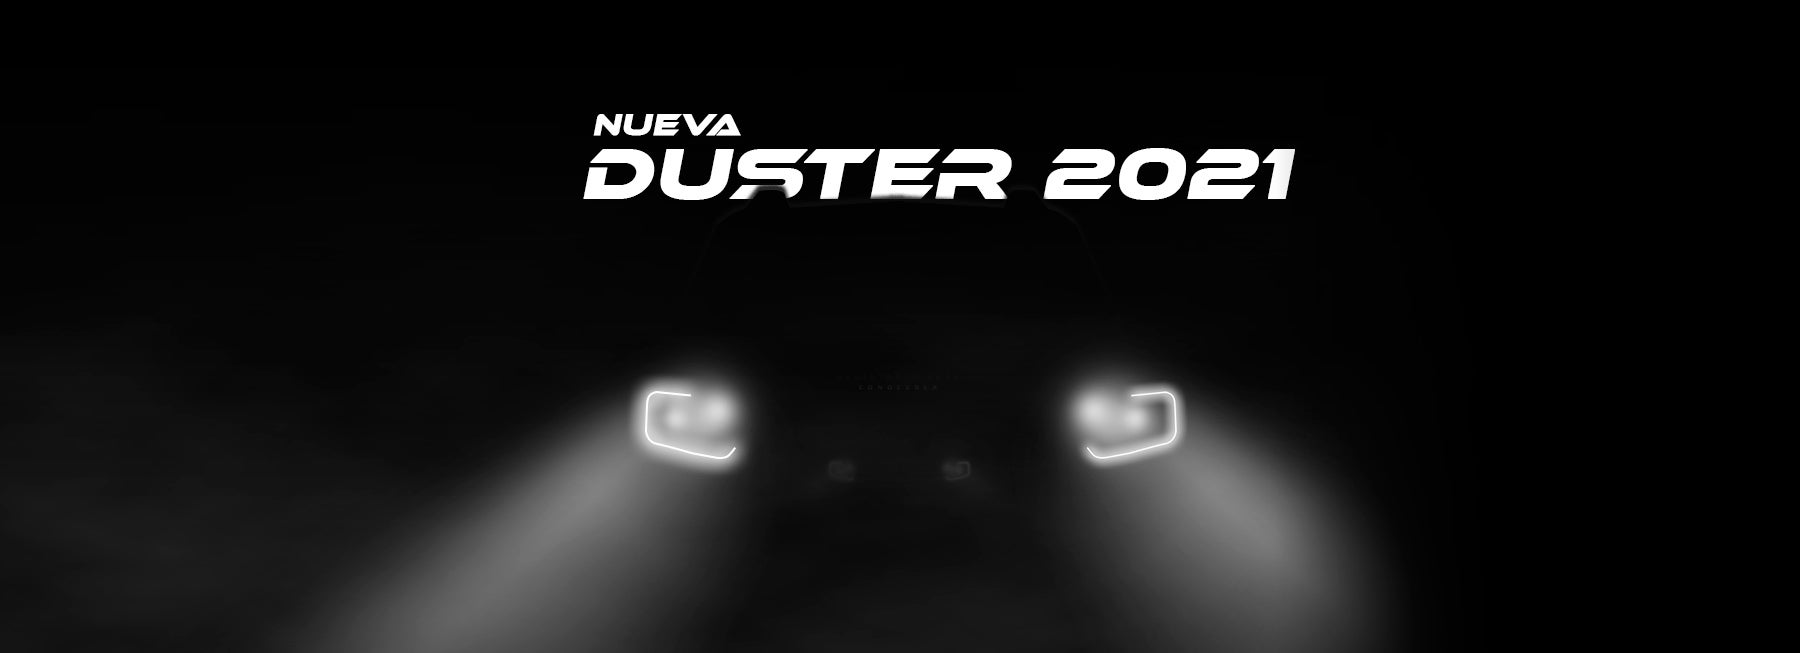 Duster 2021